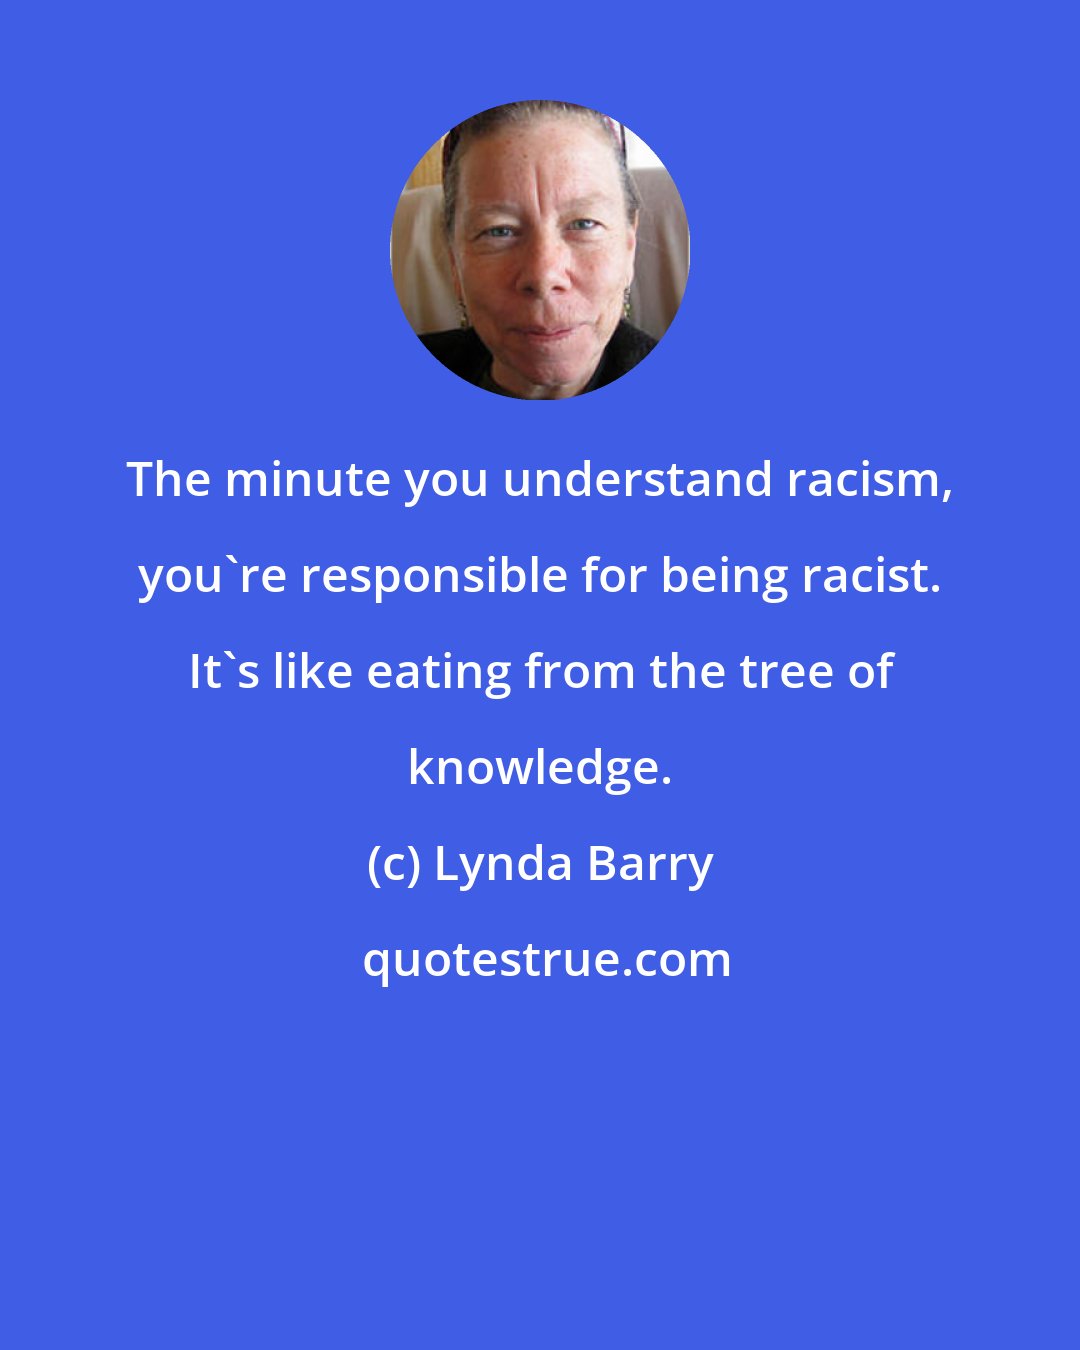 Lynda Barry: The minute you understand racism, you're responsible for being racist. It's like eating from the tree of knowledge.